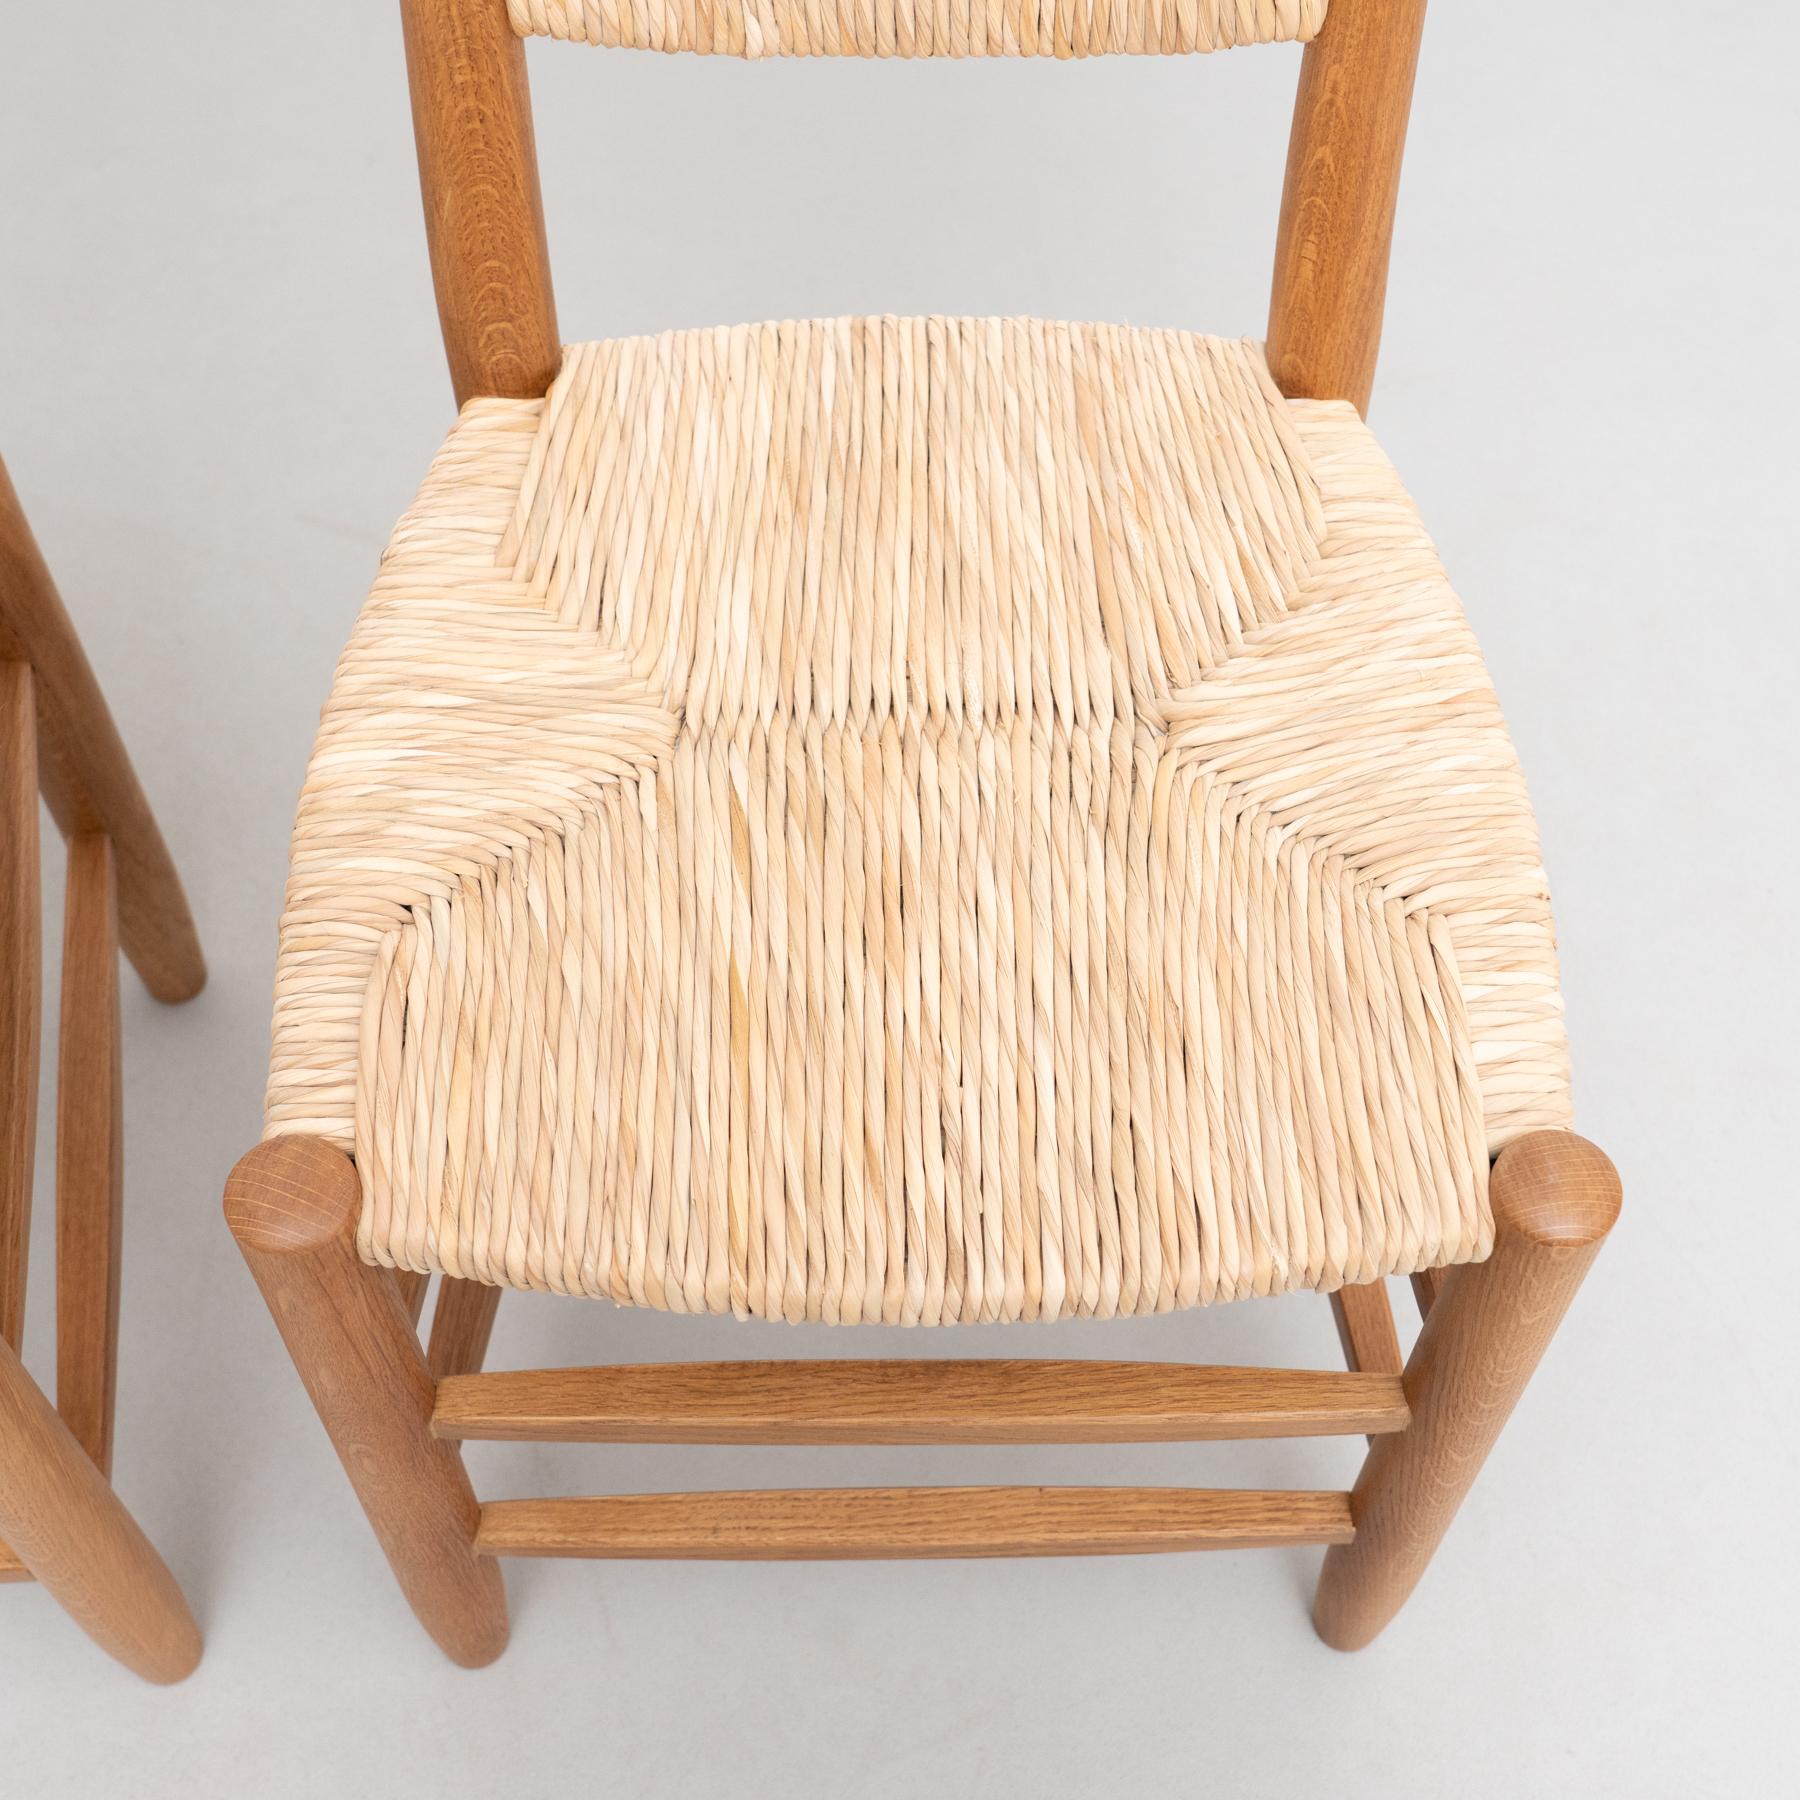 Set of 6 After Charlotte Perriand n.19 Chairs, Wood Rattan, Mid-Century Modern For Sale 15